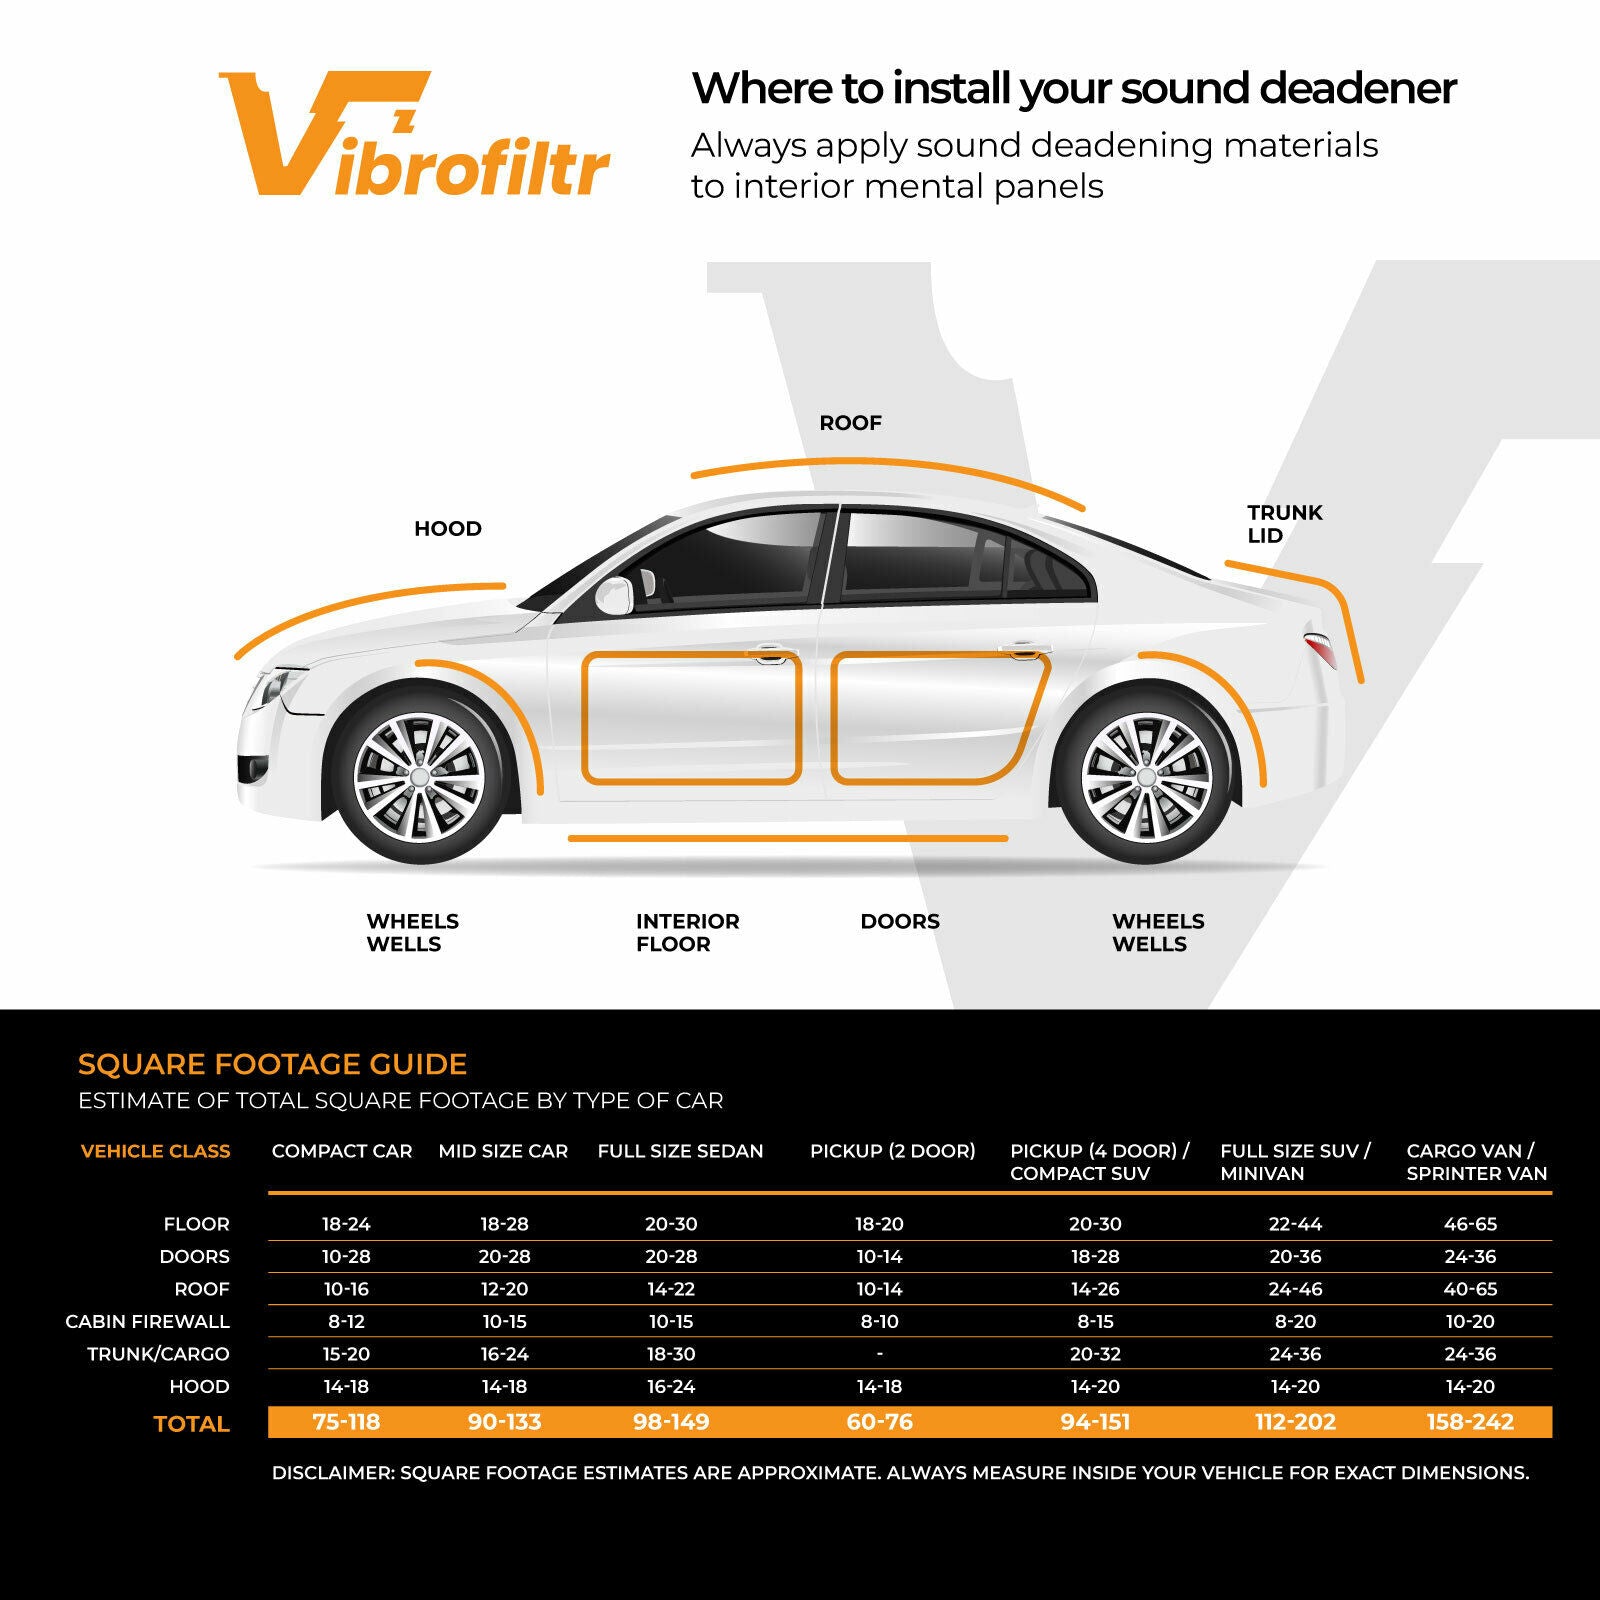 Compare prices for vibrofiltr across all European  stores